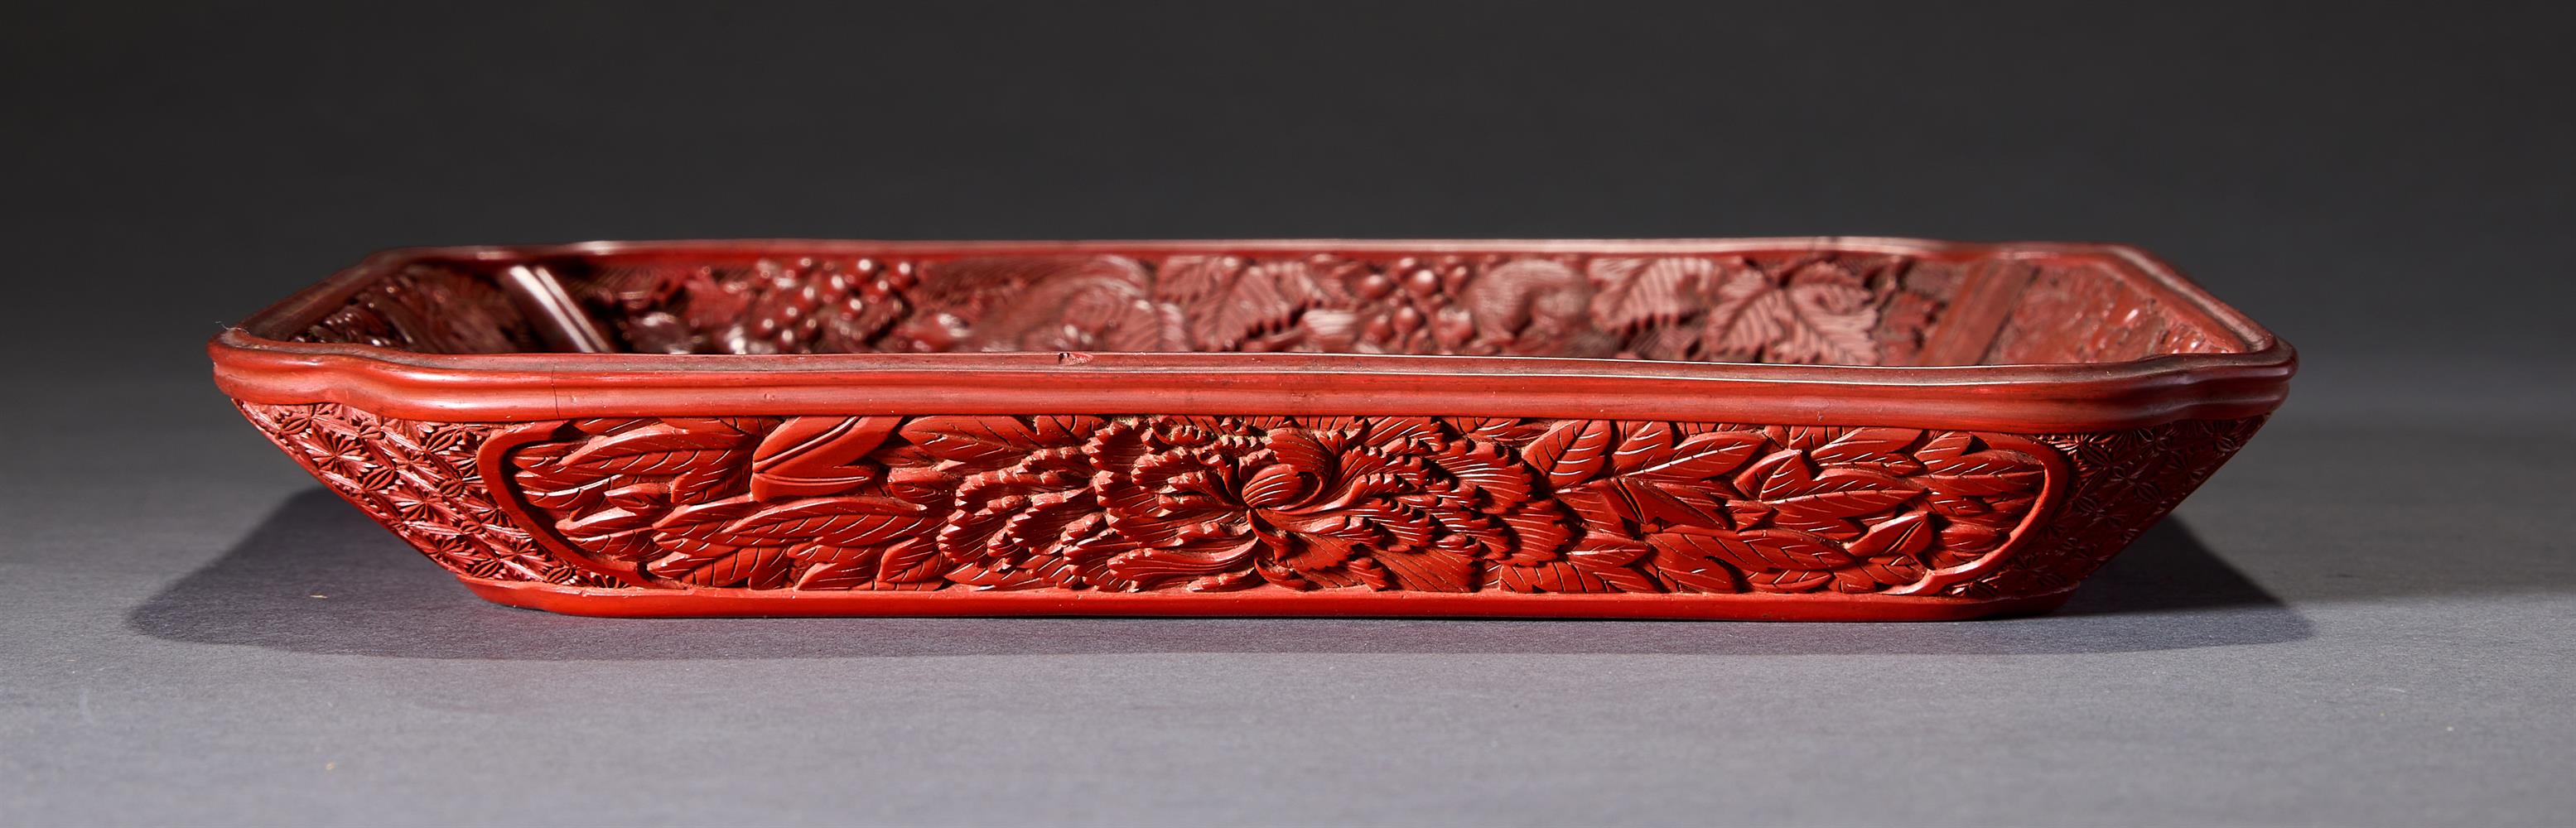 A CHINESE RED CINNABAR LACQUER CARVED SQUARE DISH, MING DYNASTY - Image 3 of 3